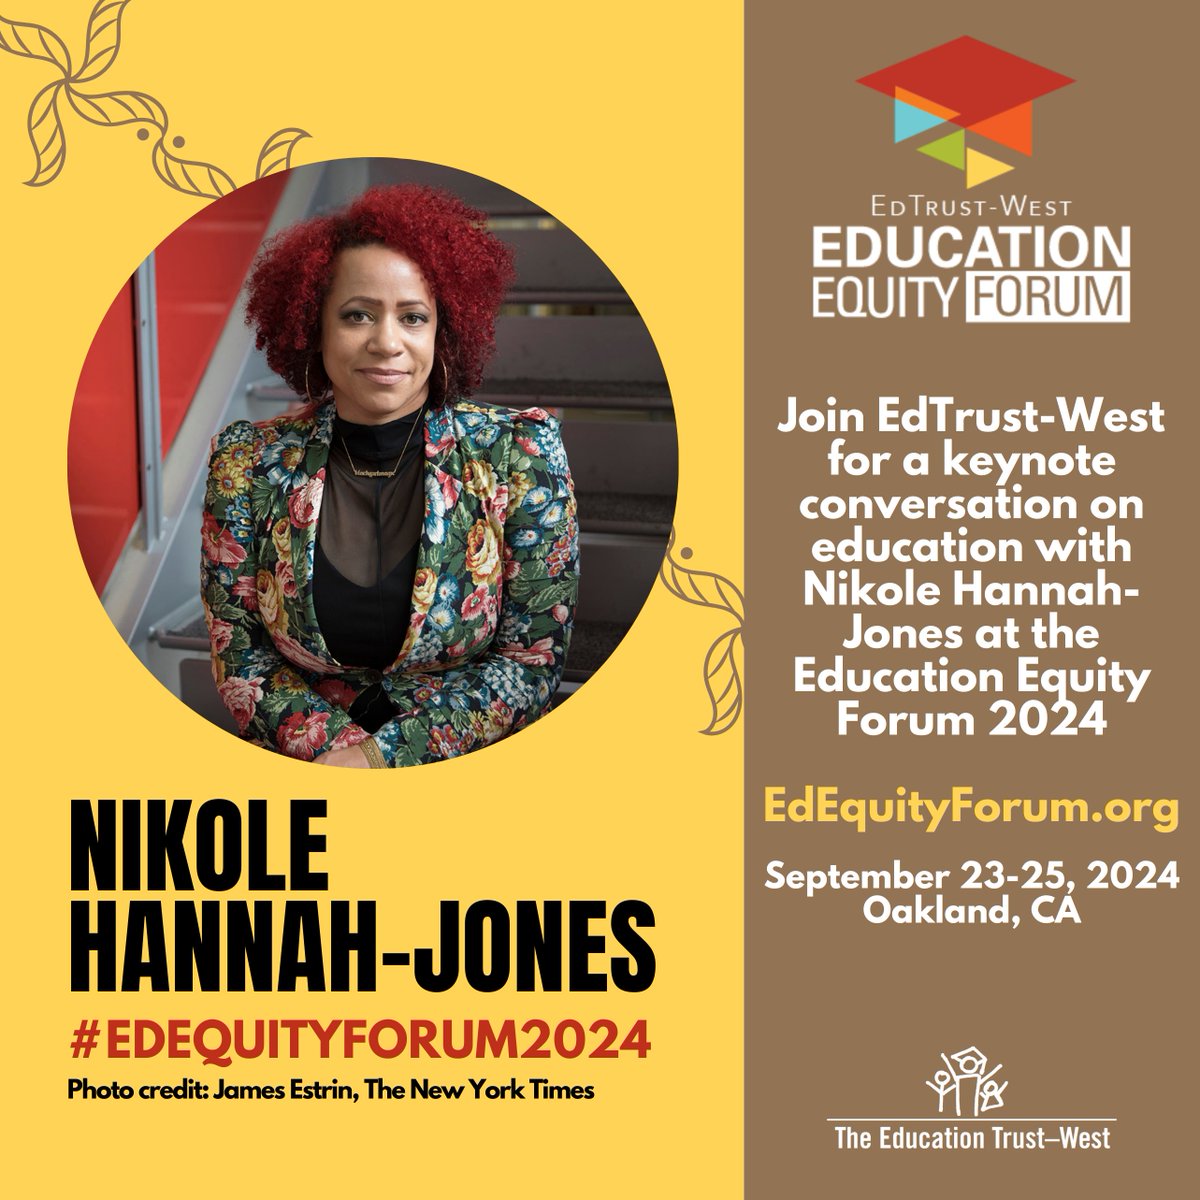 Registration is now open! We are thrilled to announce the 5th #EdEquityForum and our keynote conversation with @nhannahjones! Join us September 23-25 in Oakland for Ed Equity Forum 2024: Authenticity & Action! #EdEquityForum2024 #CAEdu edequityforum.org